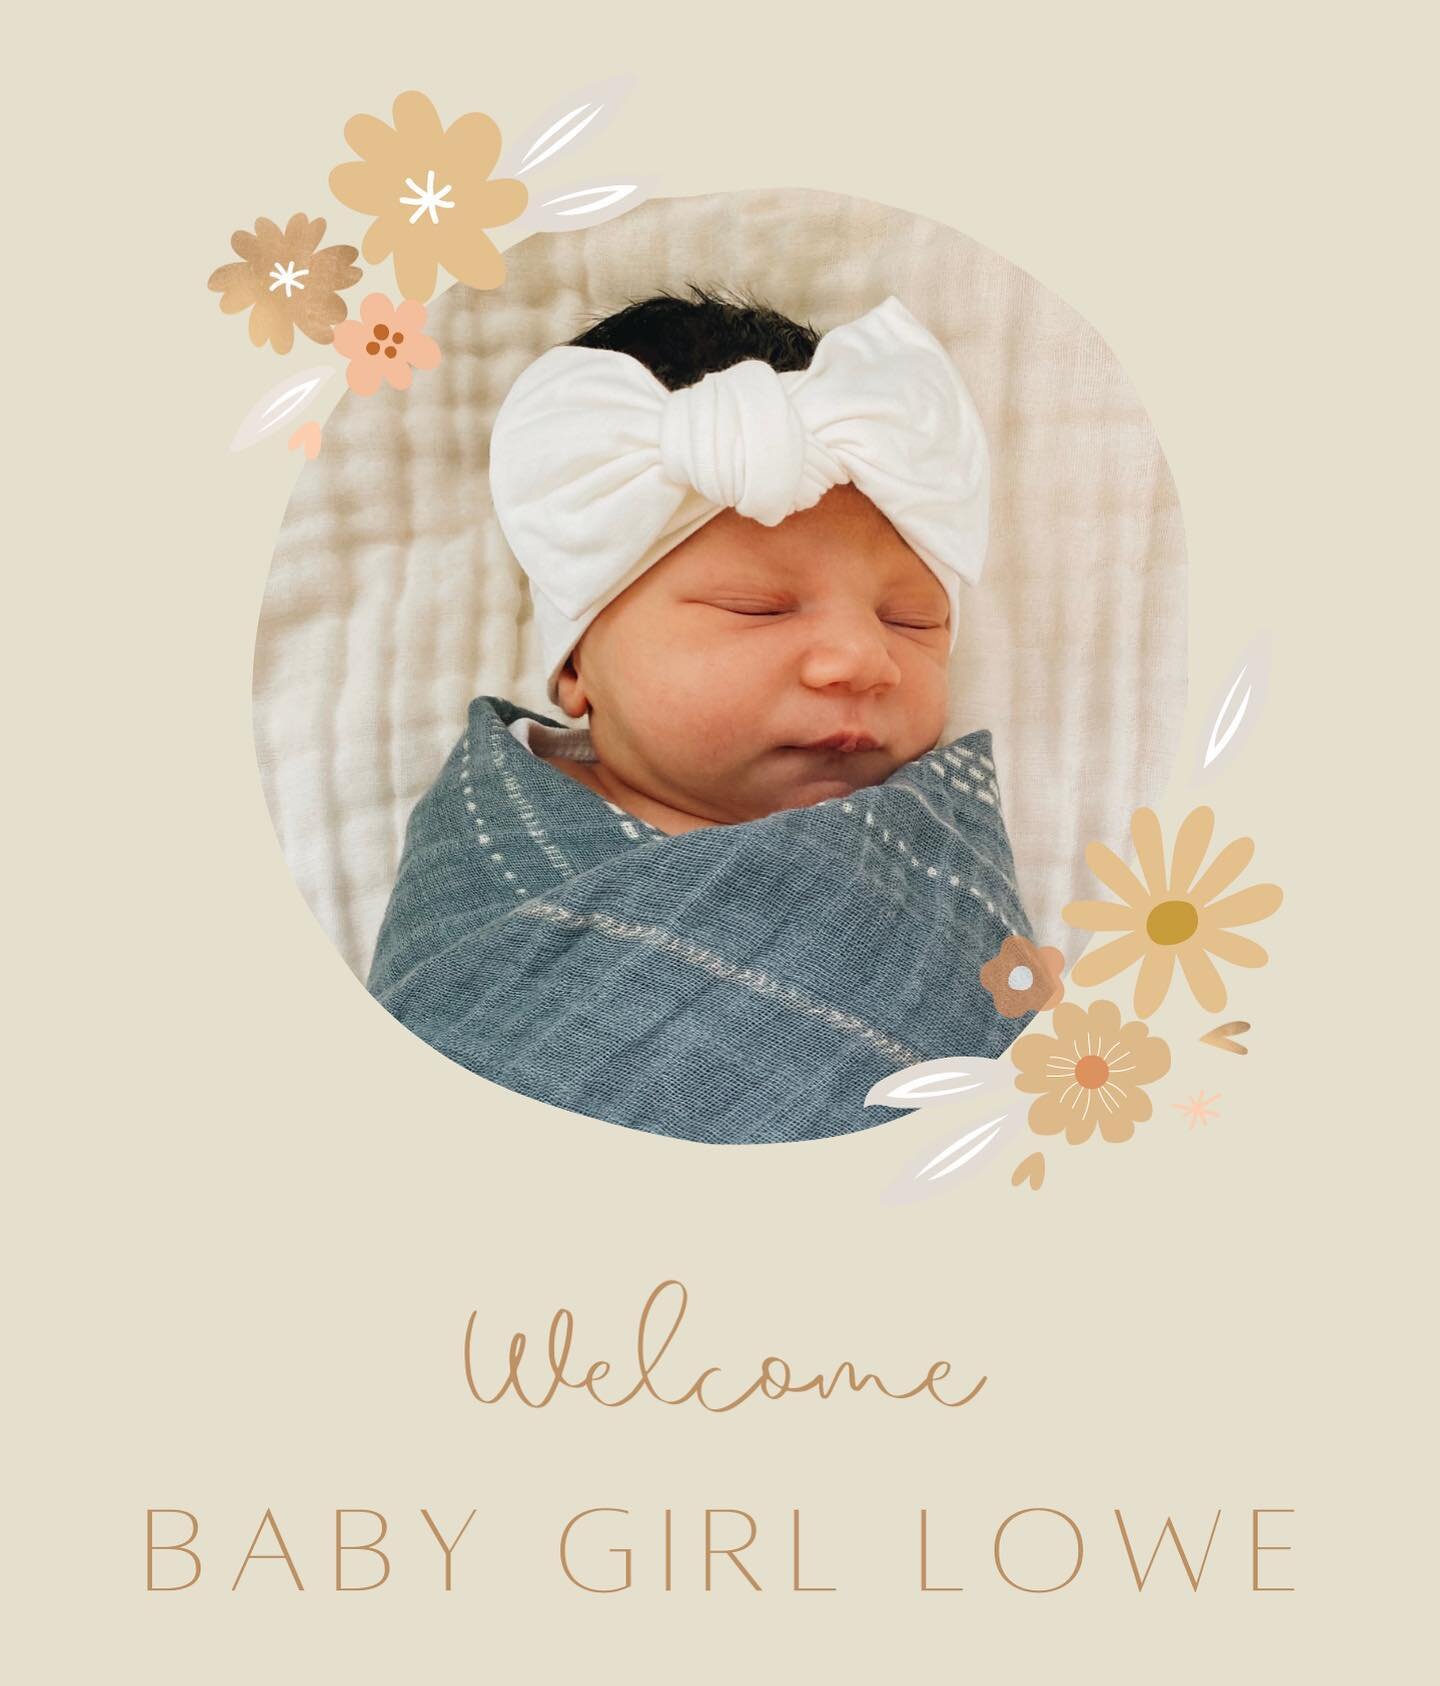 We are so very excited to introduce the newest little lady to our team &mdash;&mdash; 
Baby Girl Lowe 🌼 #LowePropertyTeam